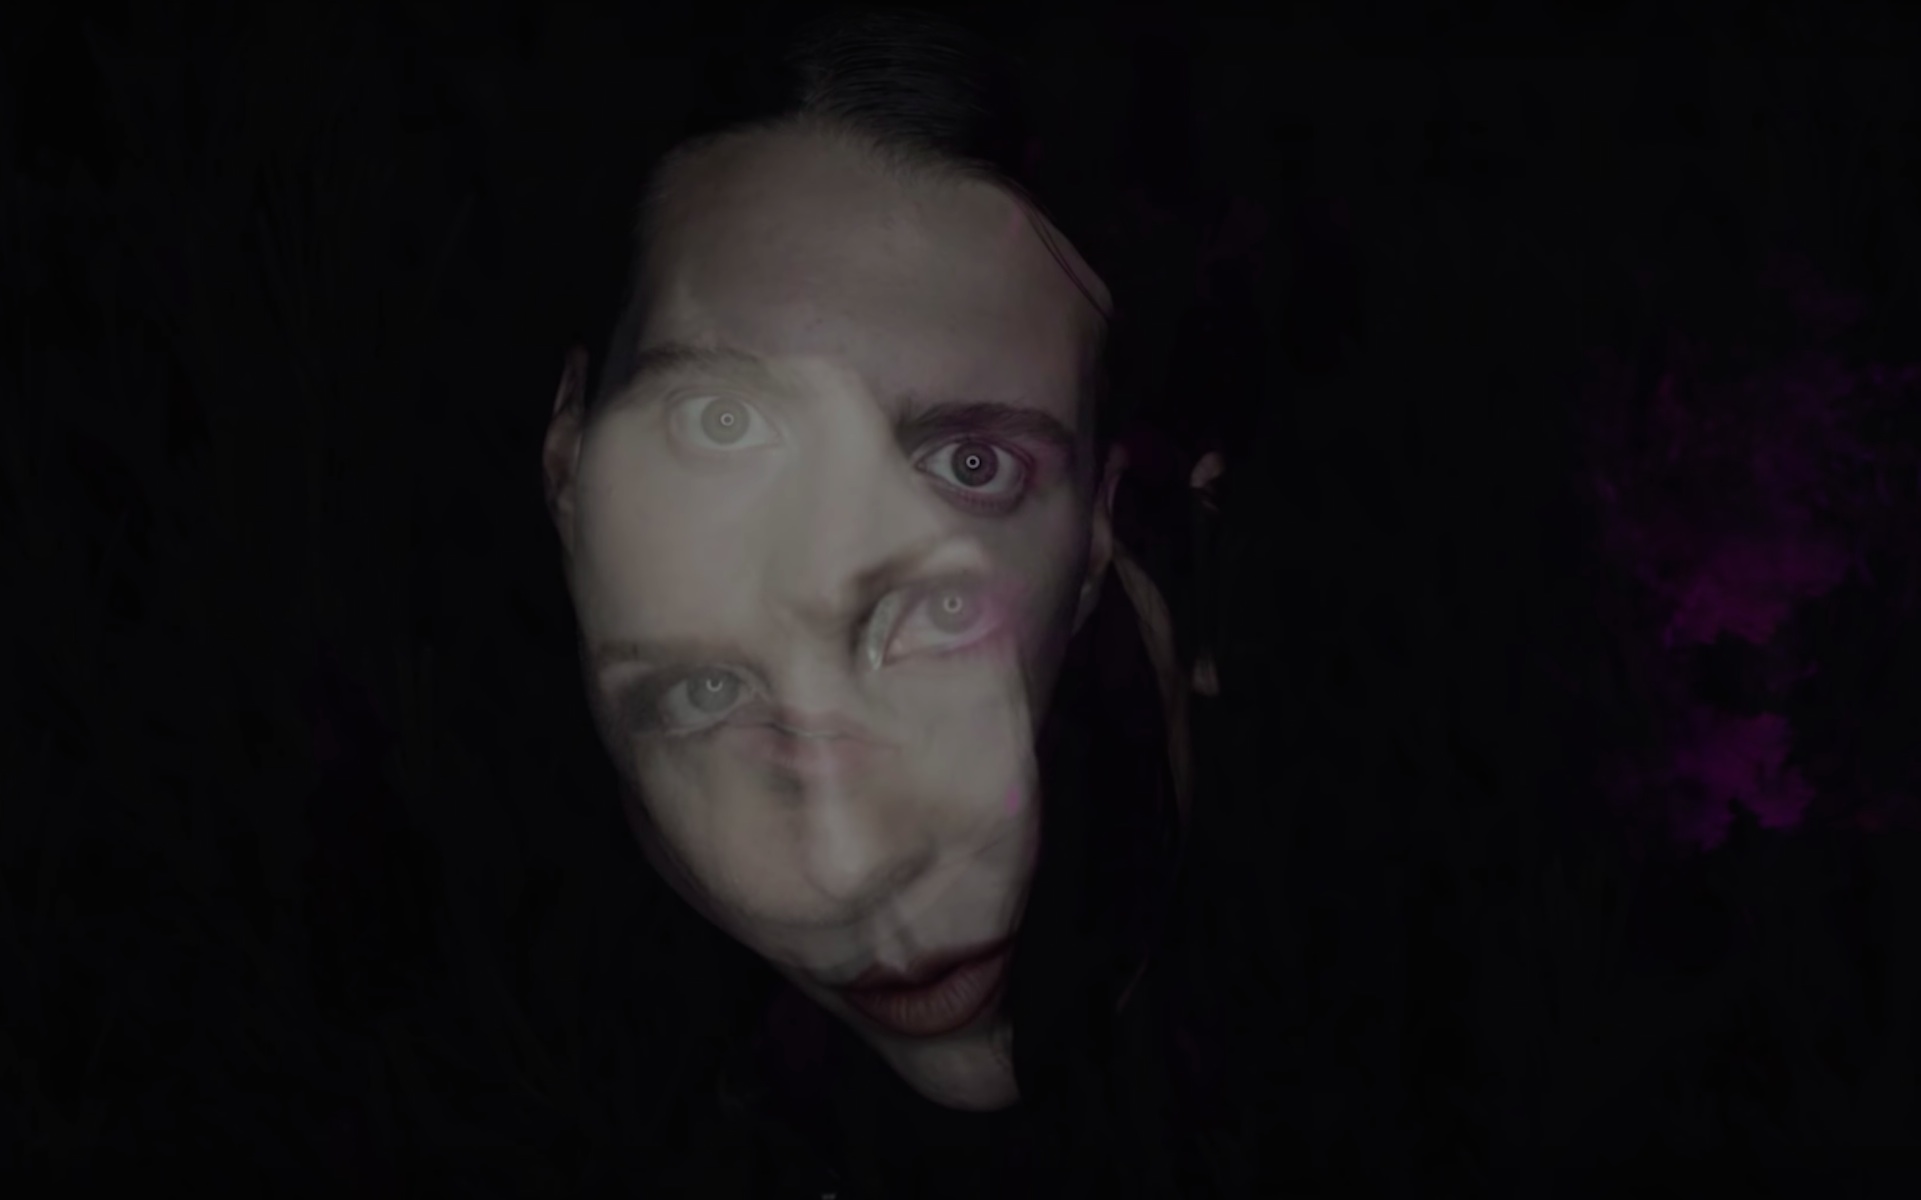 Deafheaven and Chelsea Wolfe are the 'Night People' among us